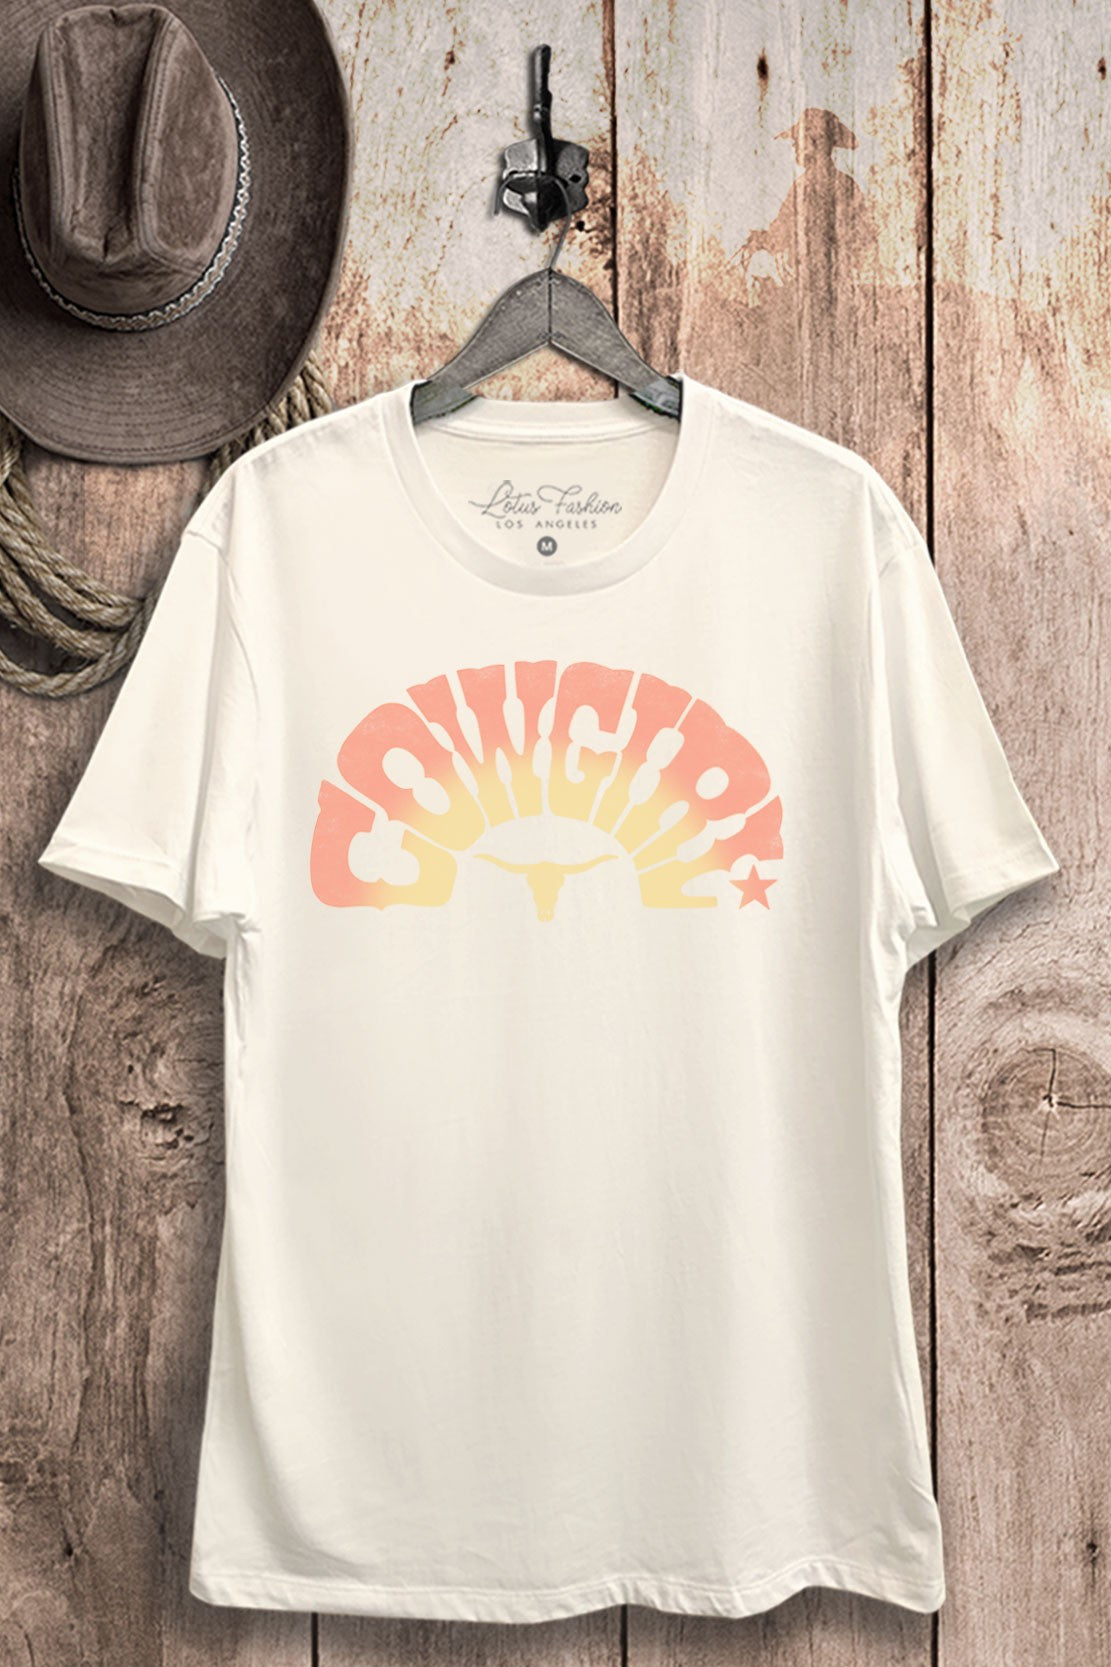 Cowgirl Graphic Tee